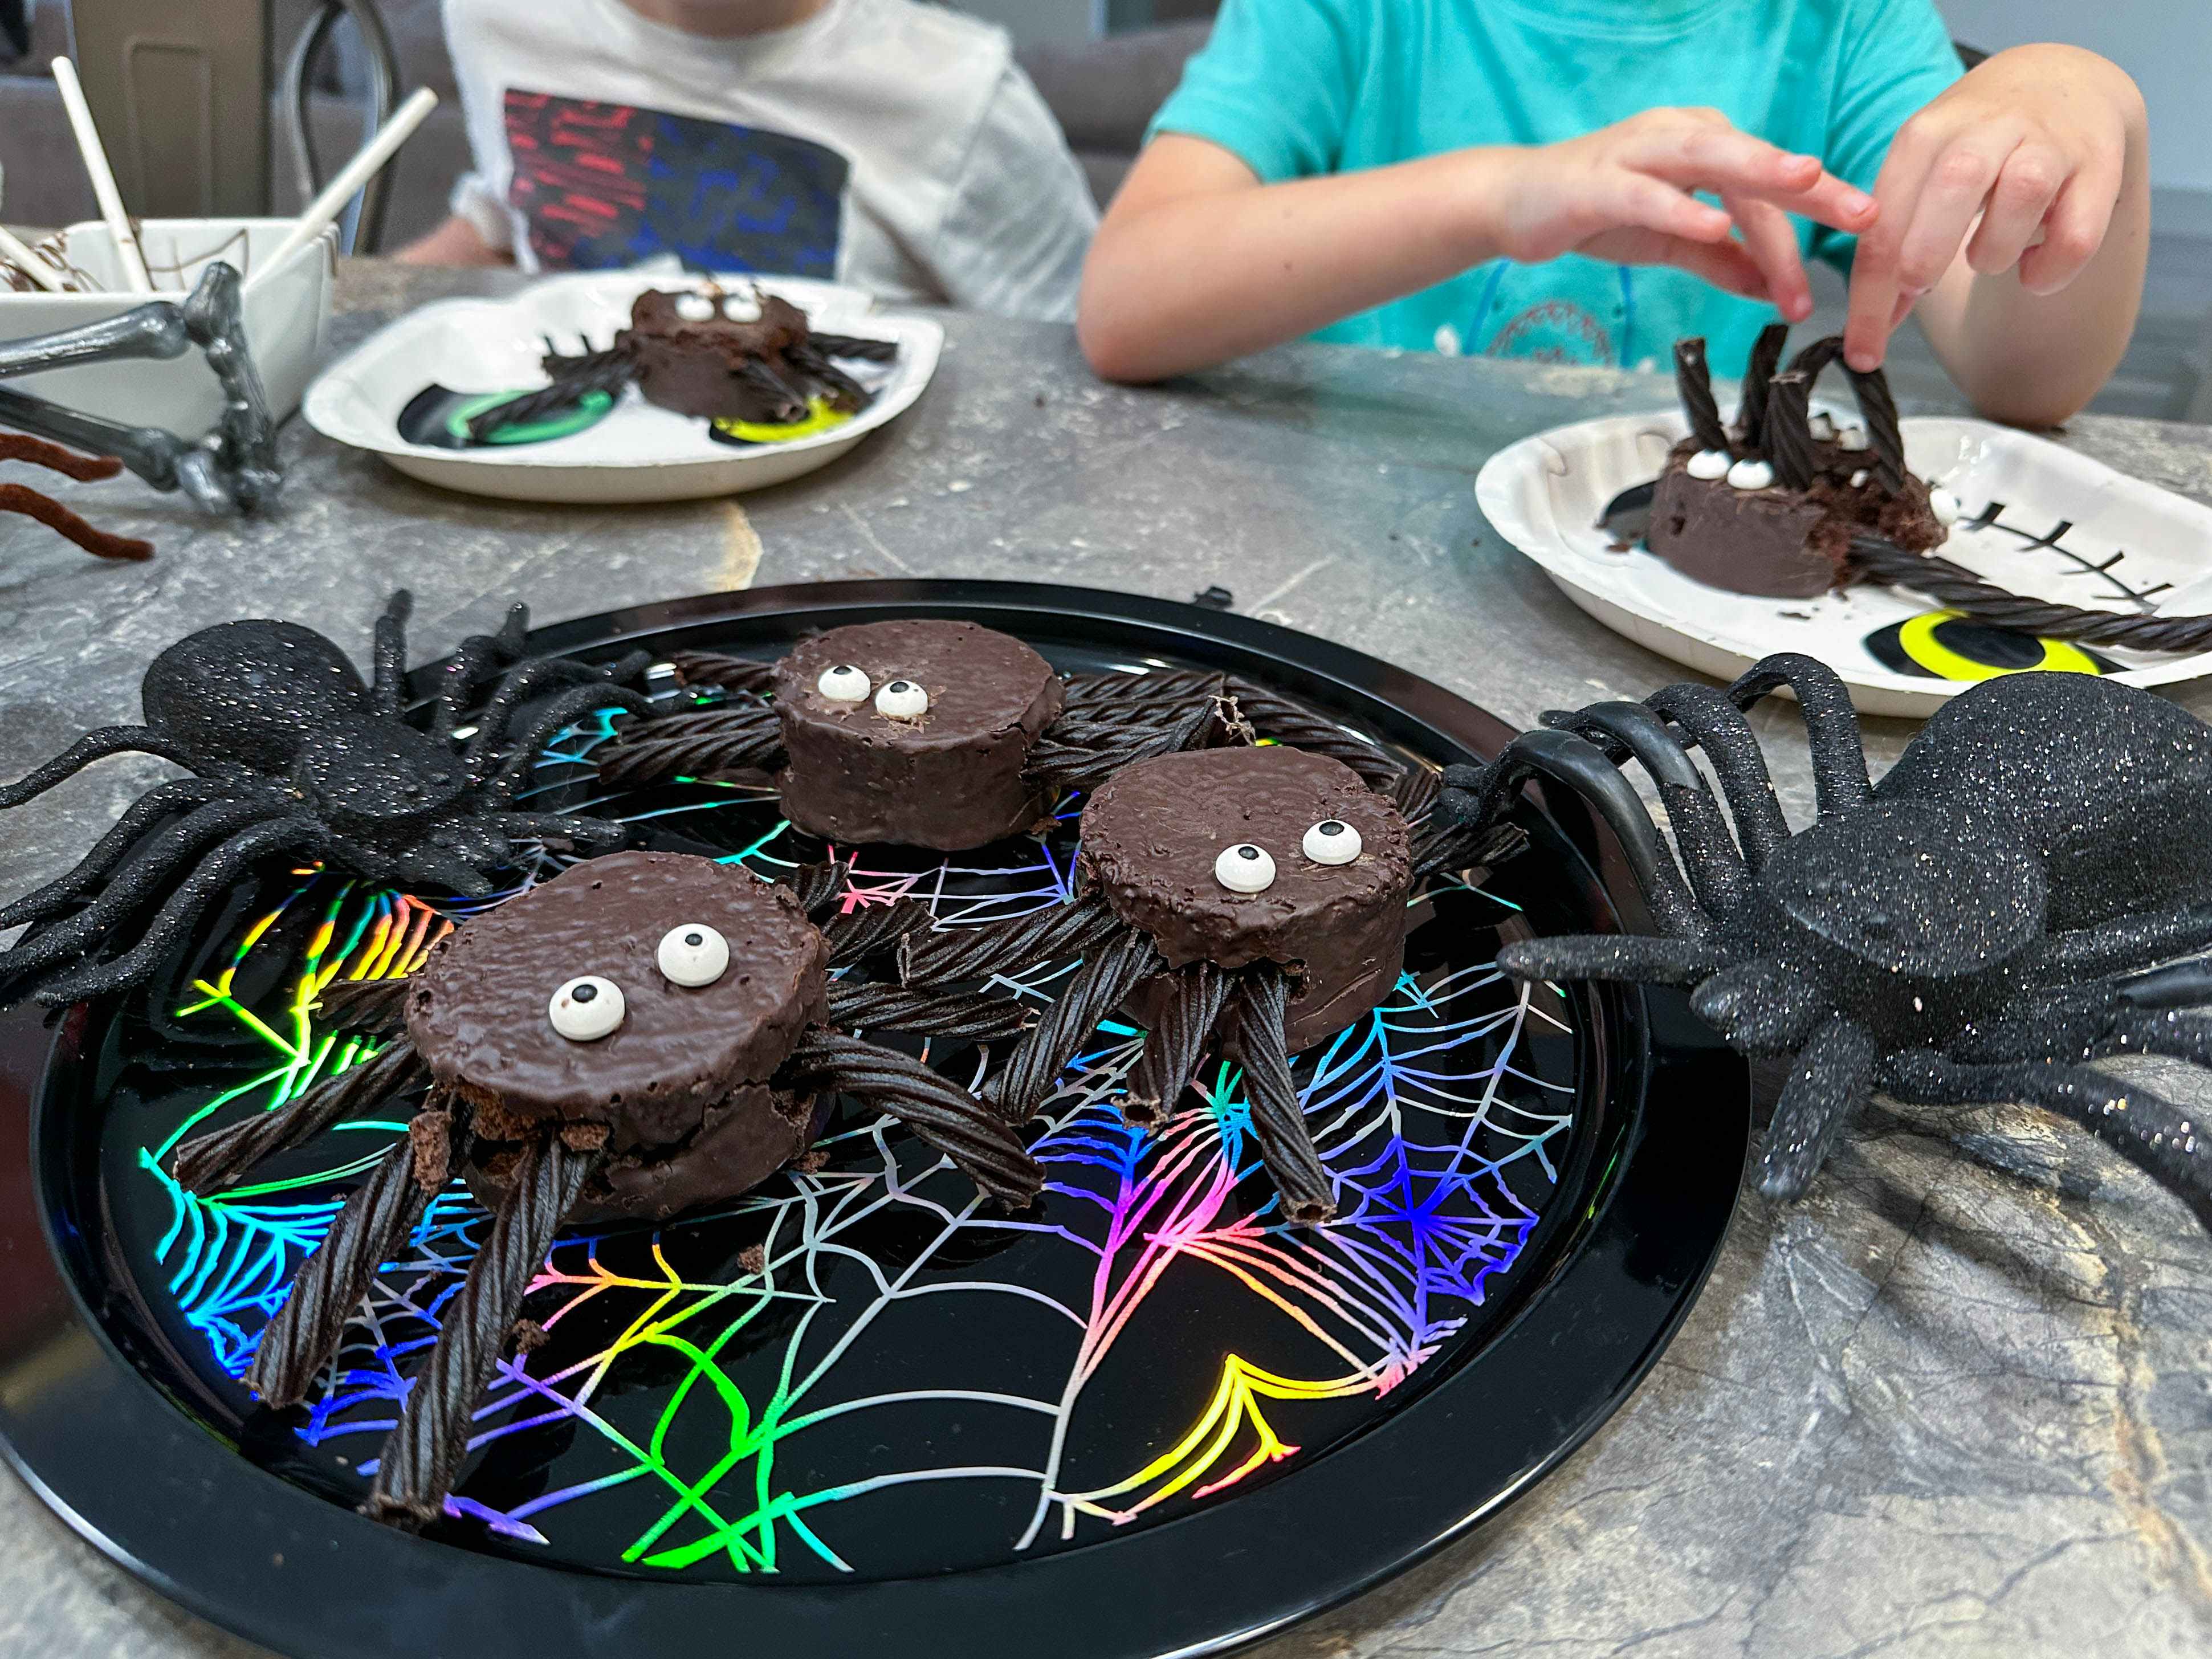 spider cakes on a tray with kids in the background making their own 